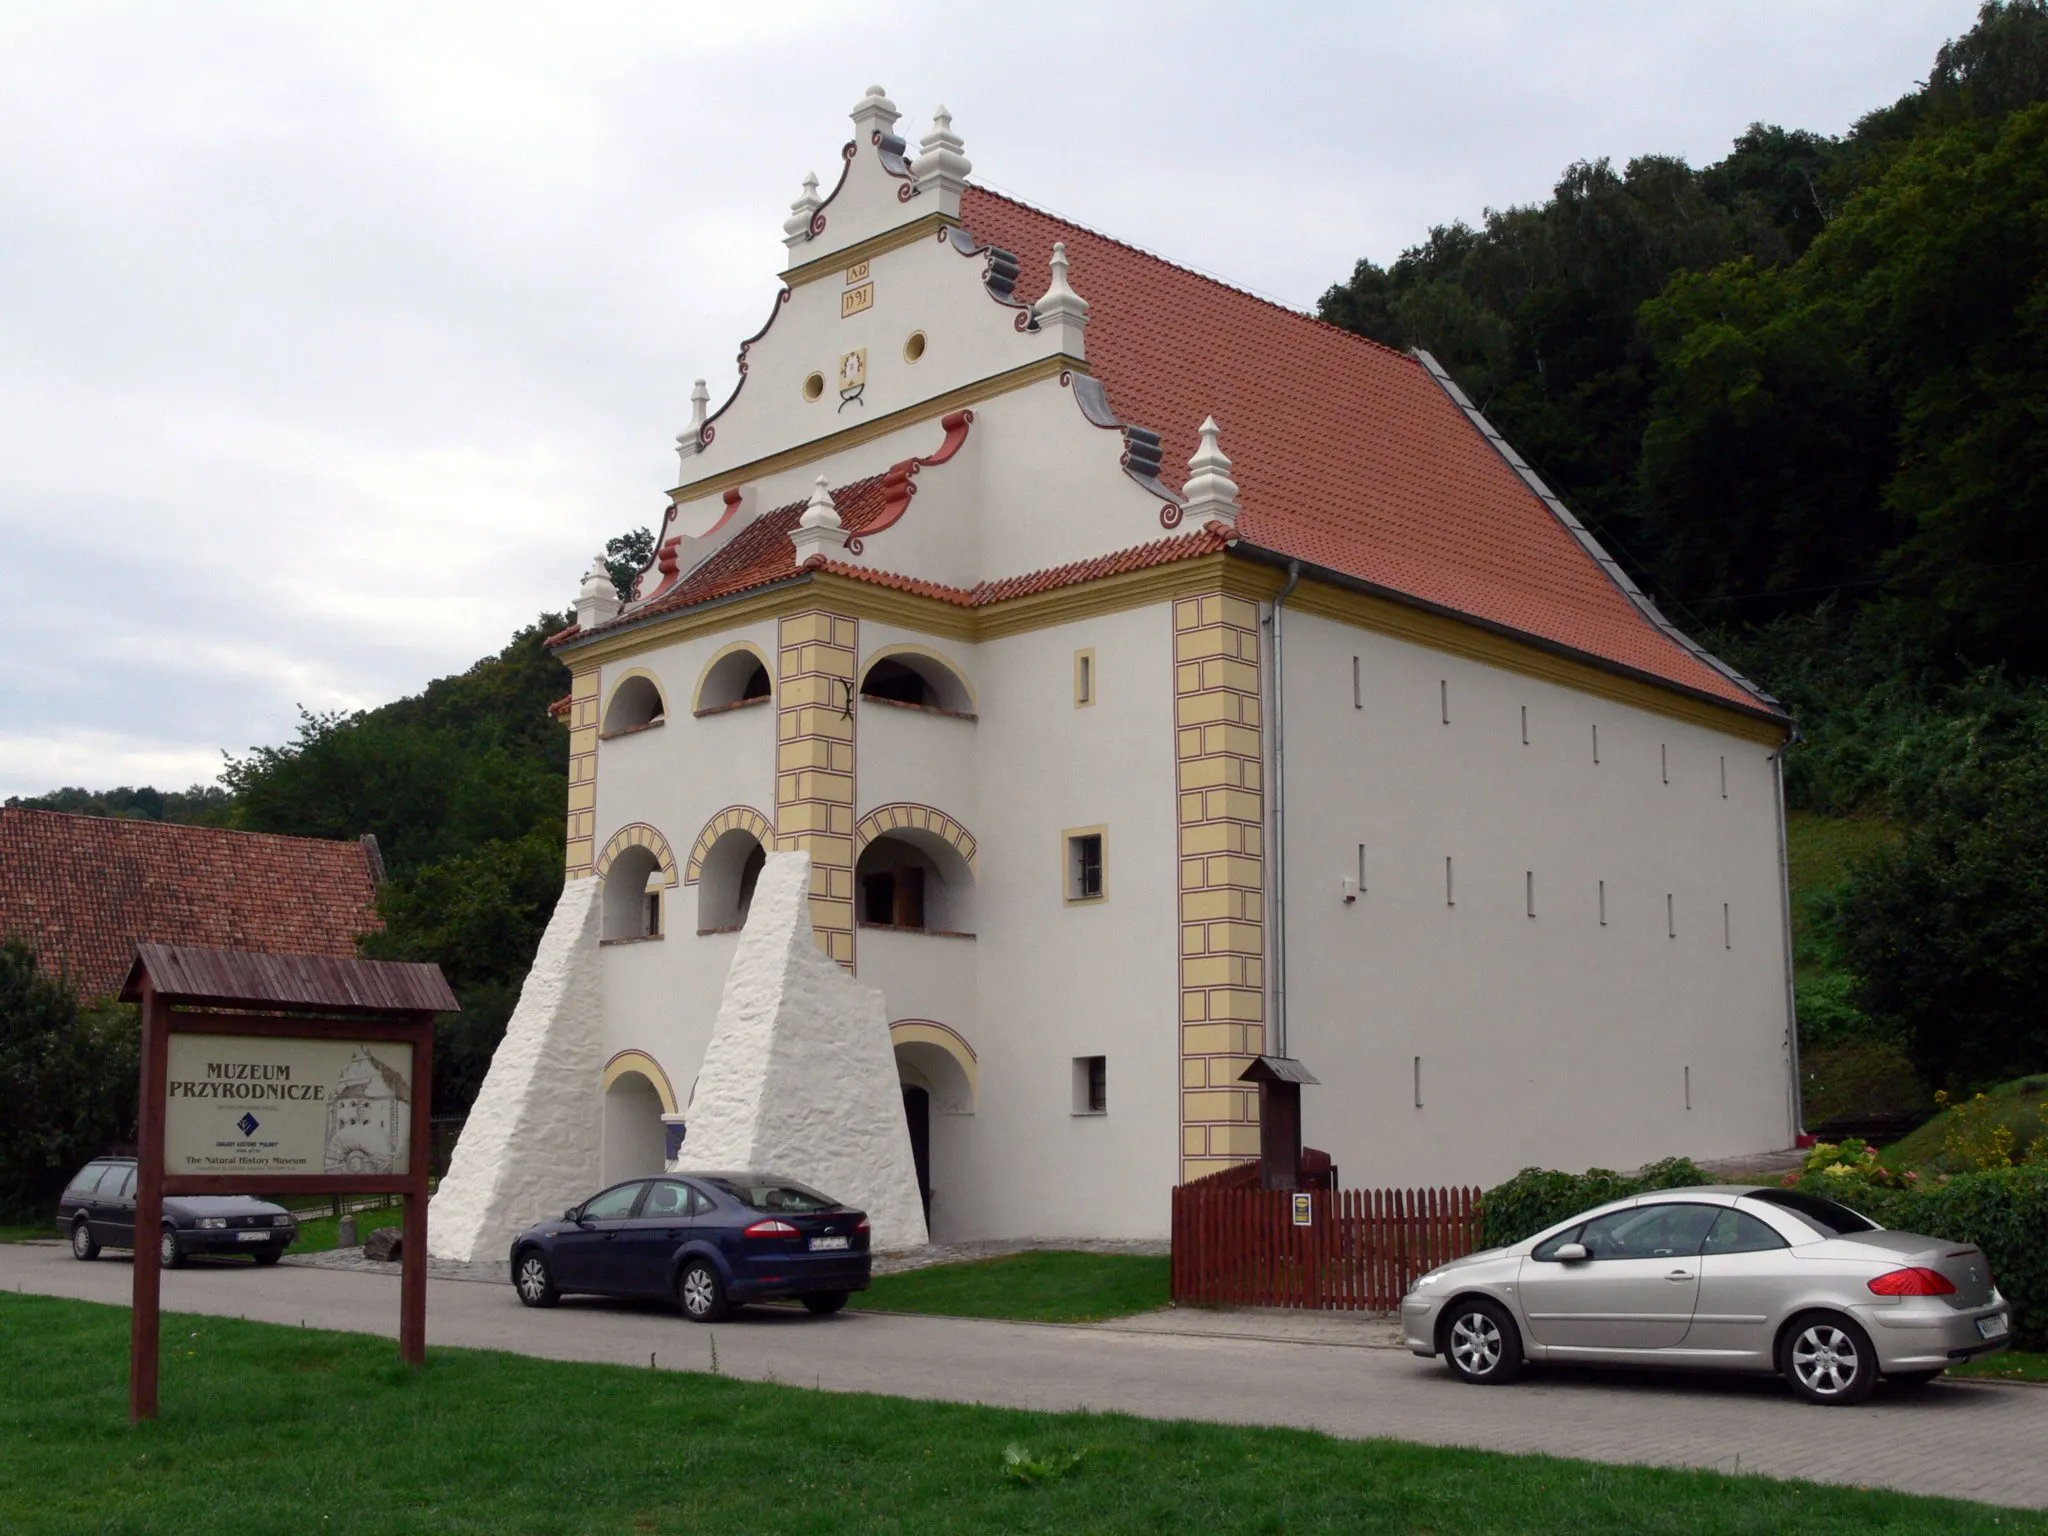 Photo showing: The Natural History Museum in Kazimierz Dolny, Poland